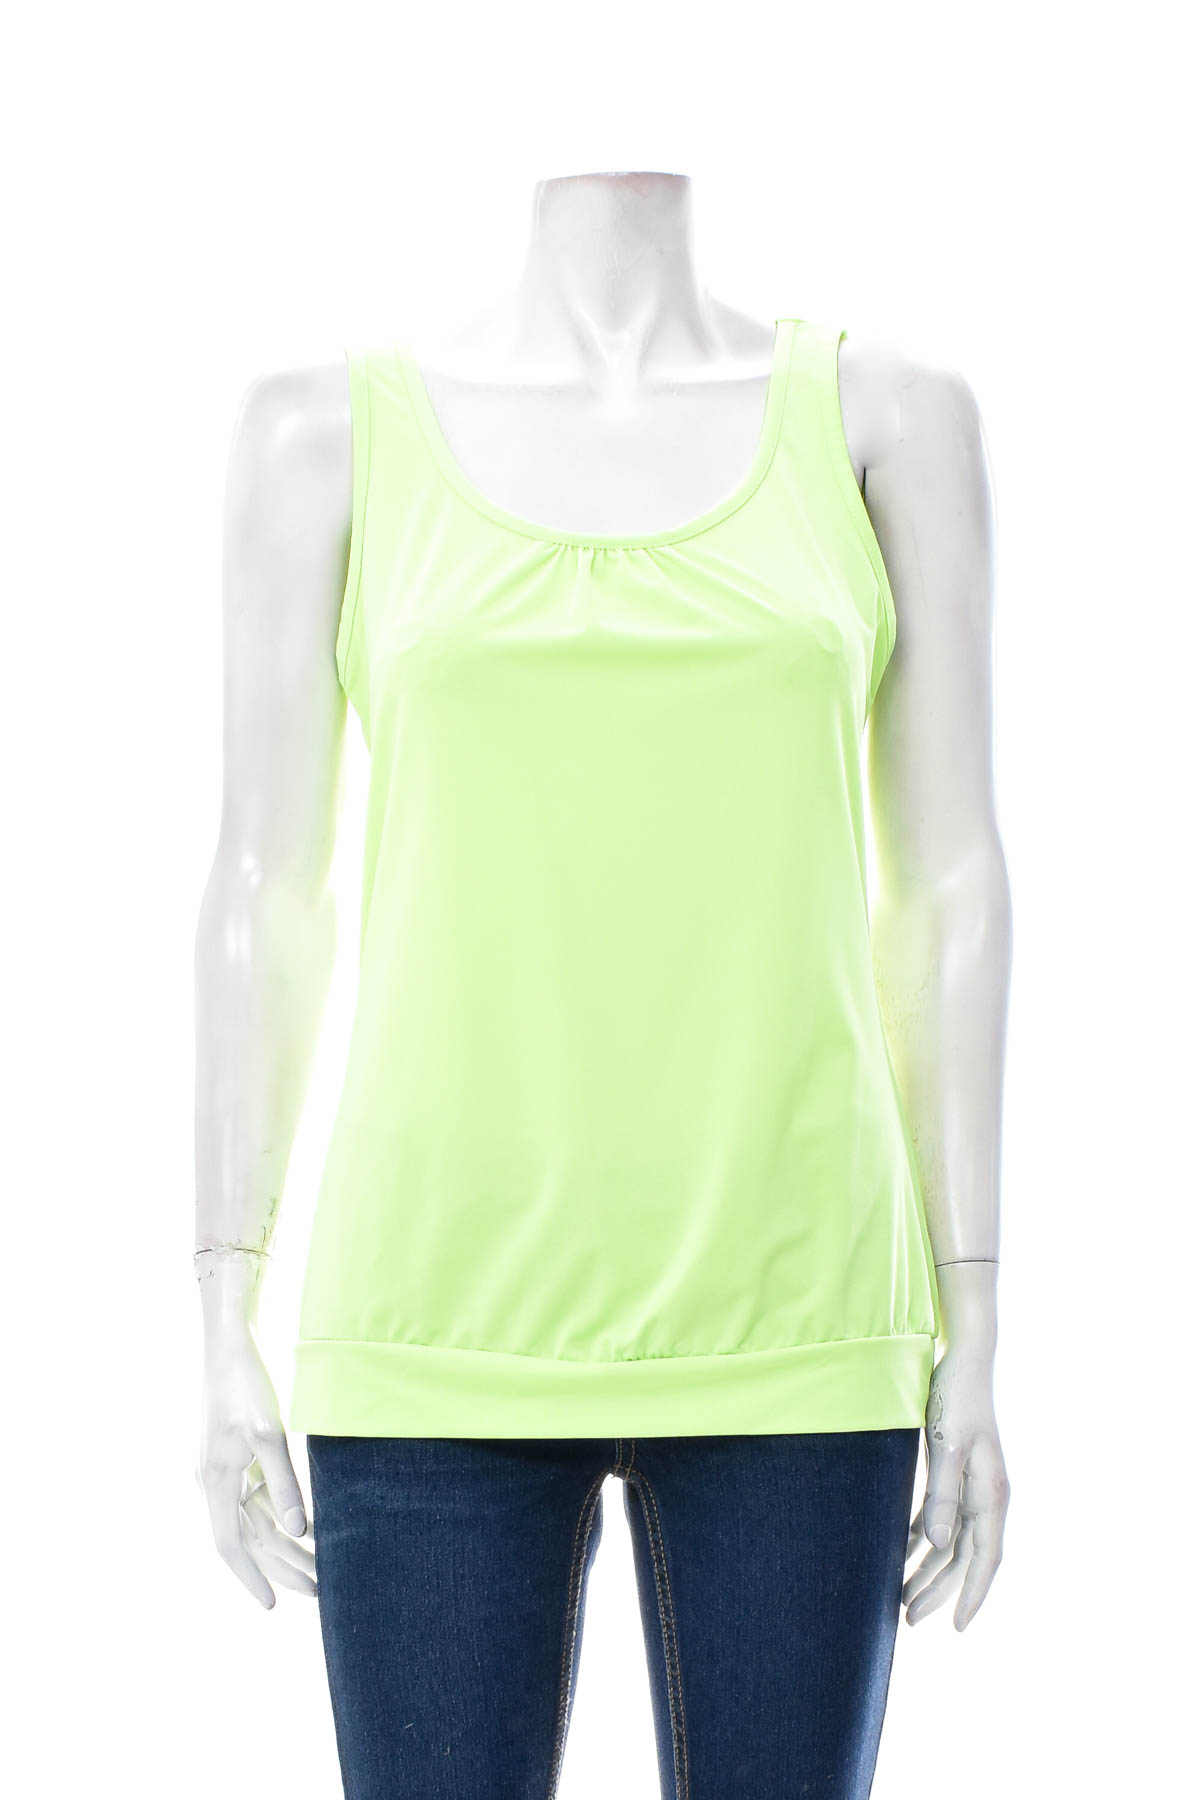 Women's top - Active by Tchibo - 0